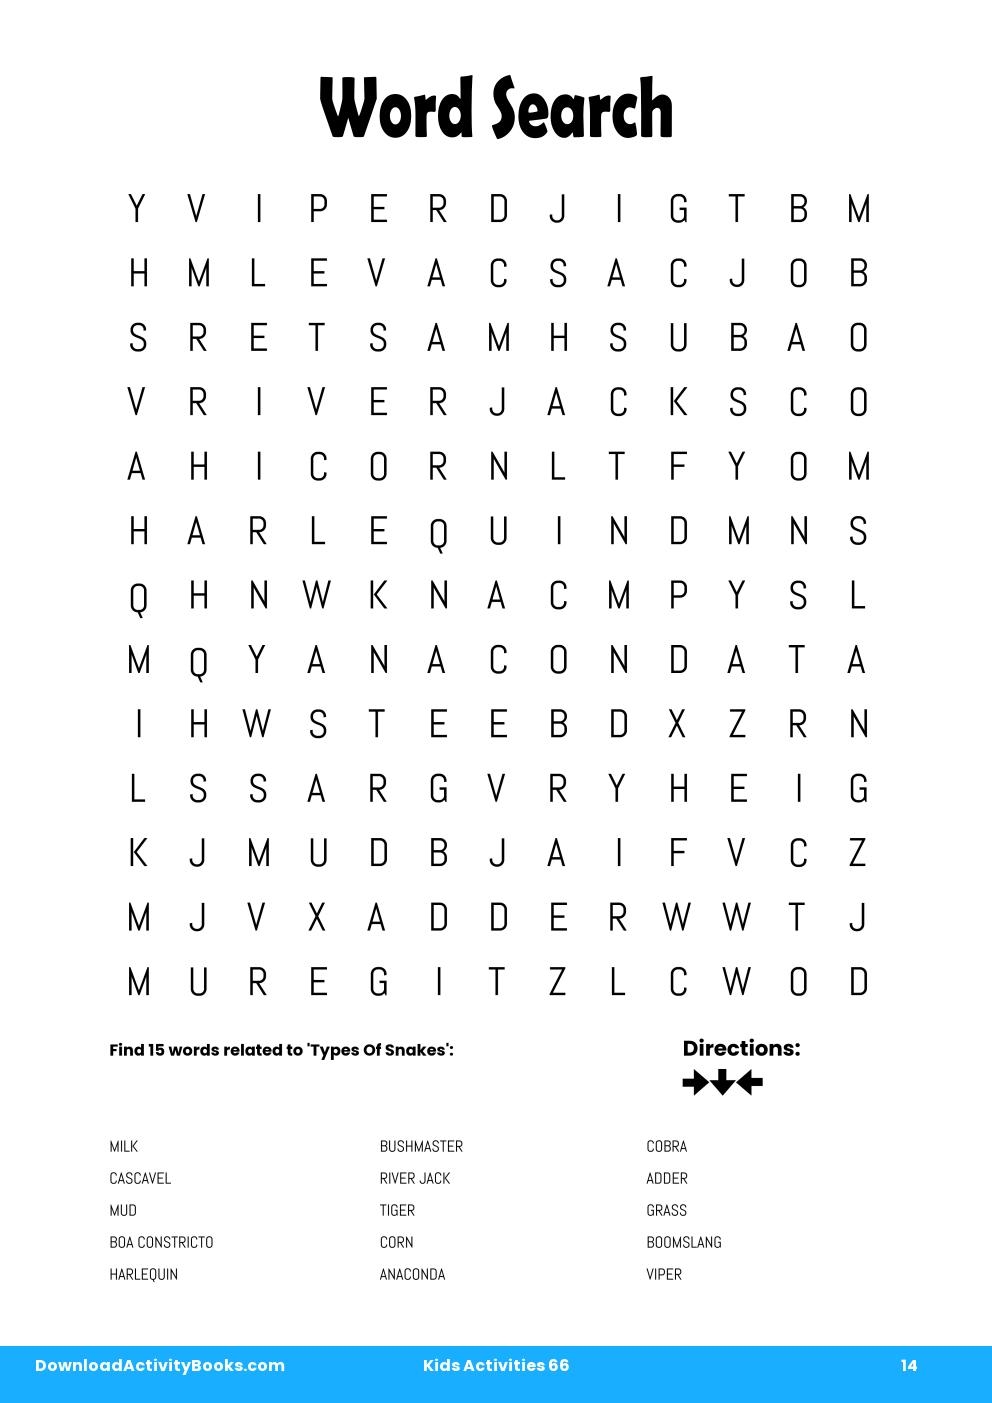 Word Search in Kids Activities 66